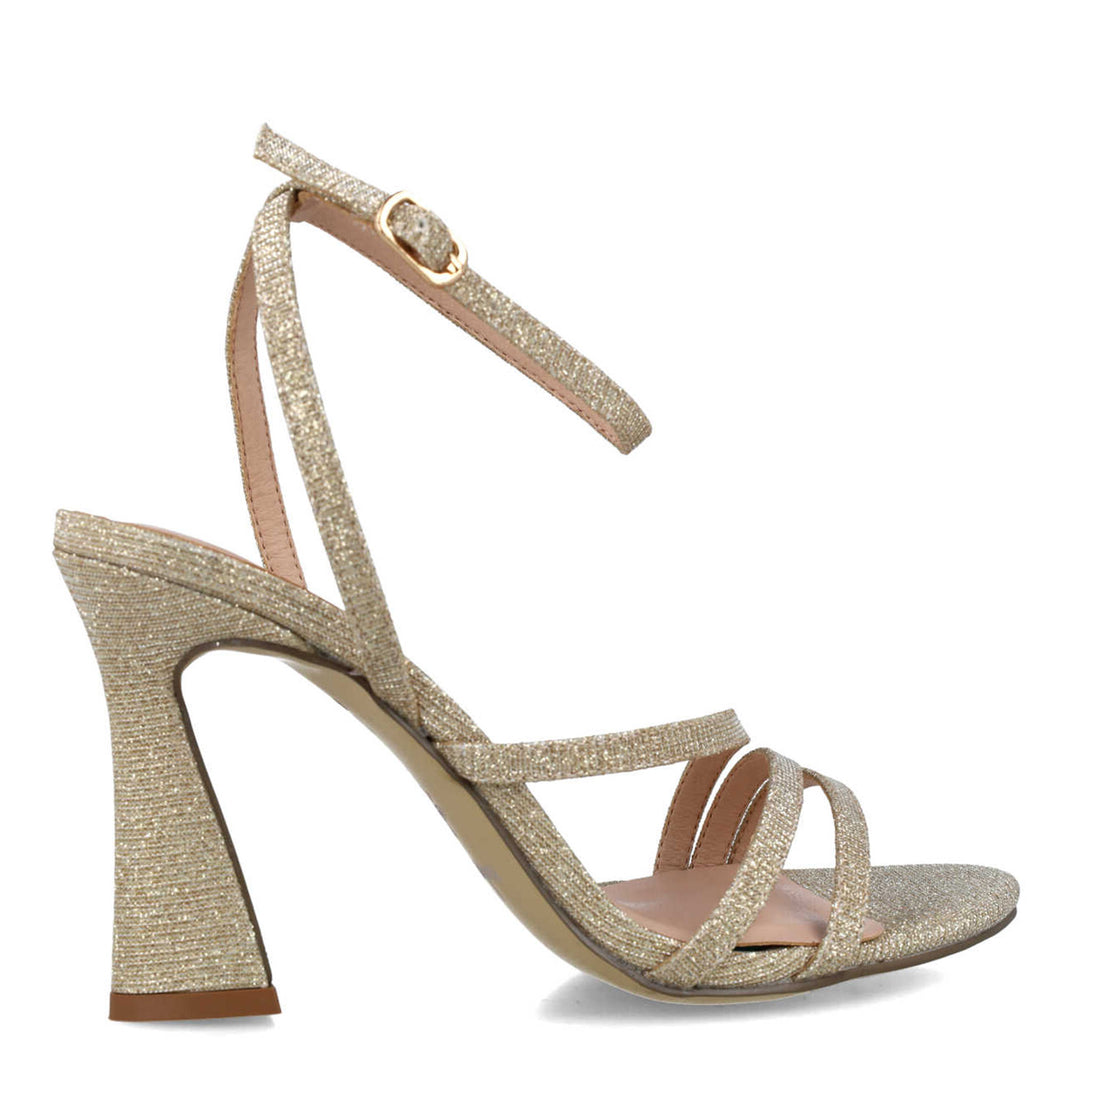 Gold High-Heel Sandals With Ankle-Strap